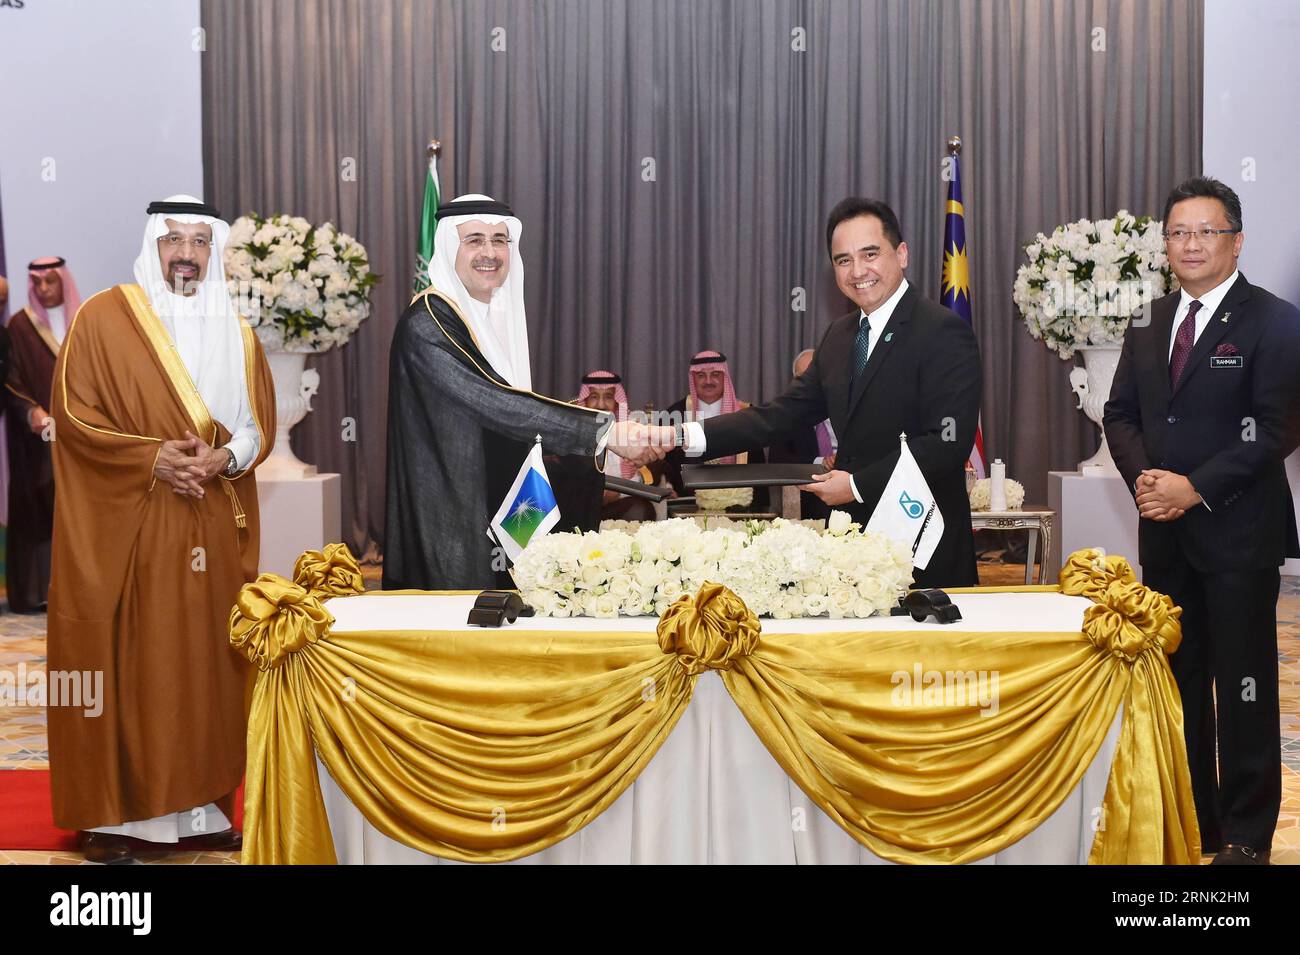 (170228) -- KUALA LUMPUR, Feb. 28, 2017 () -- Saudi Aramco s CEO Amin H. Nasser (2nd L) shakes hands with Petronas chief Wan Zulkiflee Wan Ariffin (2nd R) during a signing ceremony in Kuala Lumpur, Malaysia, on Feb. 28, 2017. Saudi Aramco and Petronas, the two national oil companies from Saudi Arabia and Malaysia respectively, entered into a 50-50 partnership on Tuesday. Saudi Aramco will invest 7 billion U.S. dollars in a refinery in the southern Malaysian state of Johor, called Refinery and Petrochemical Integrated Development, or RAPID. () (zy) MALAYSIA-SAUDI ARABIA-OIL COMPANIES-INVESTMENT Stock Photo